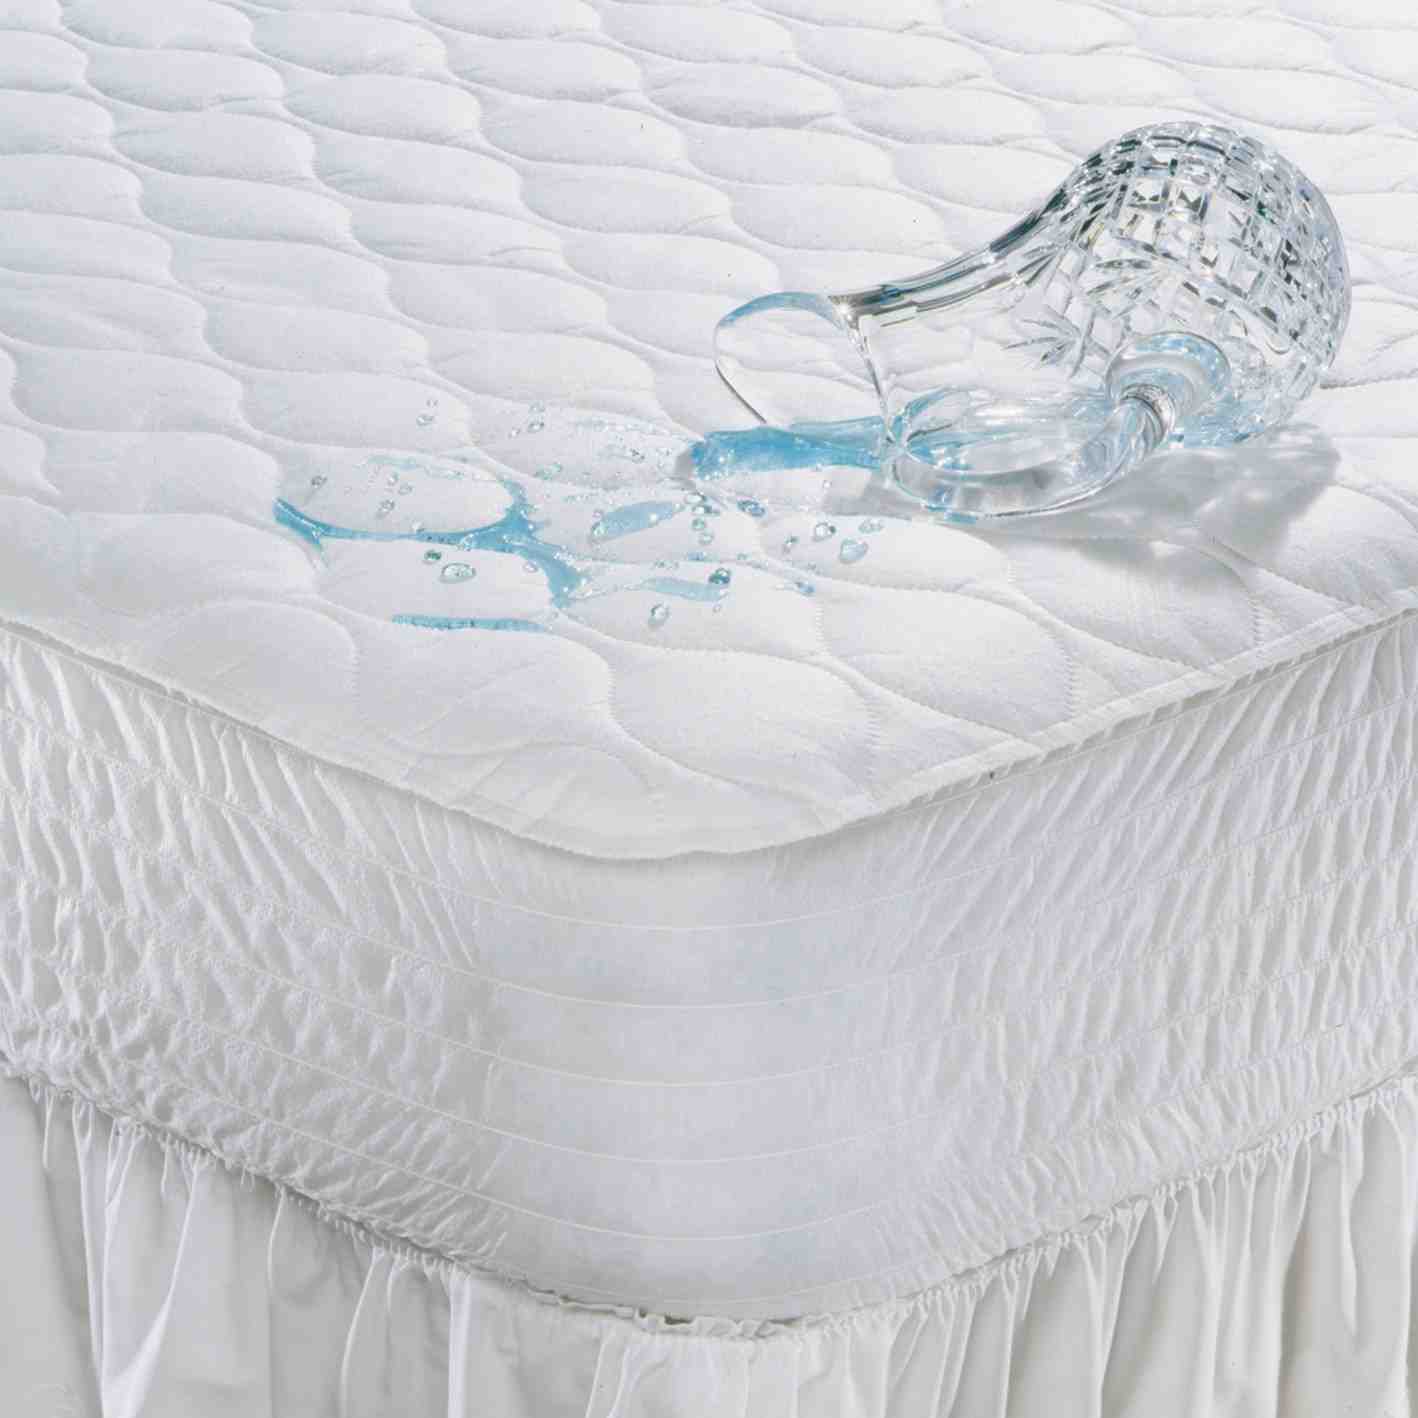 Waterproof Mattress Cover: The Important Benefits